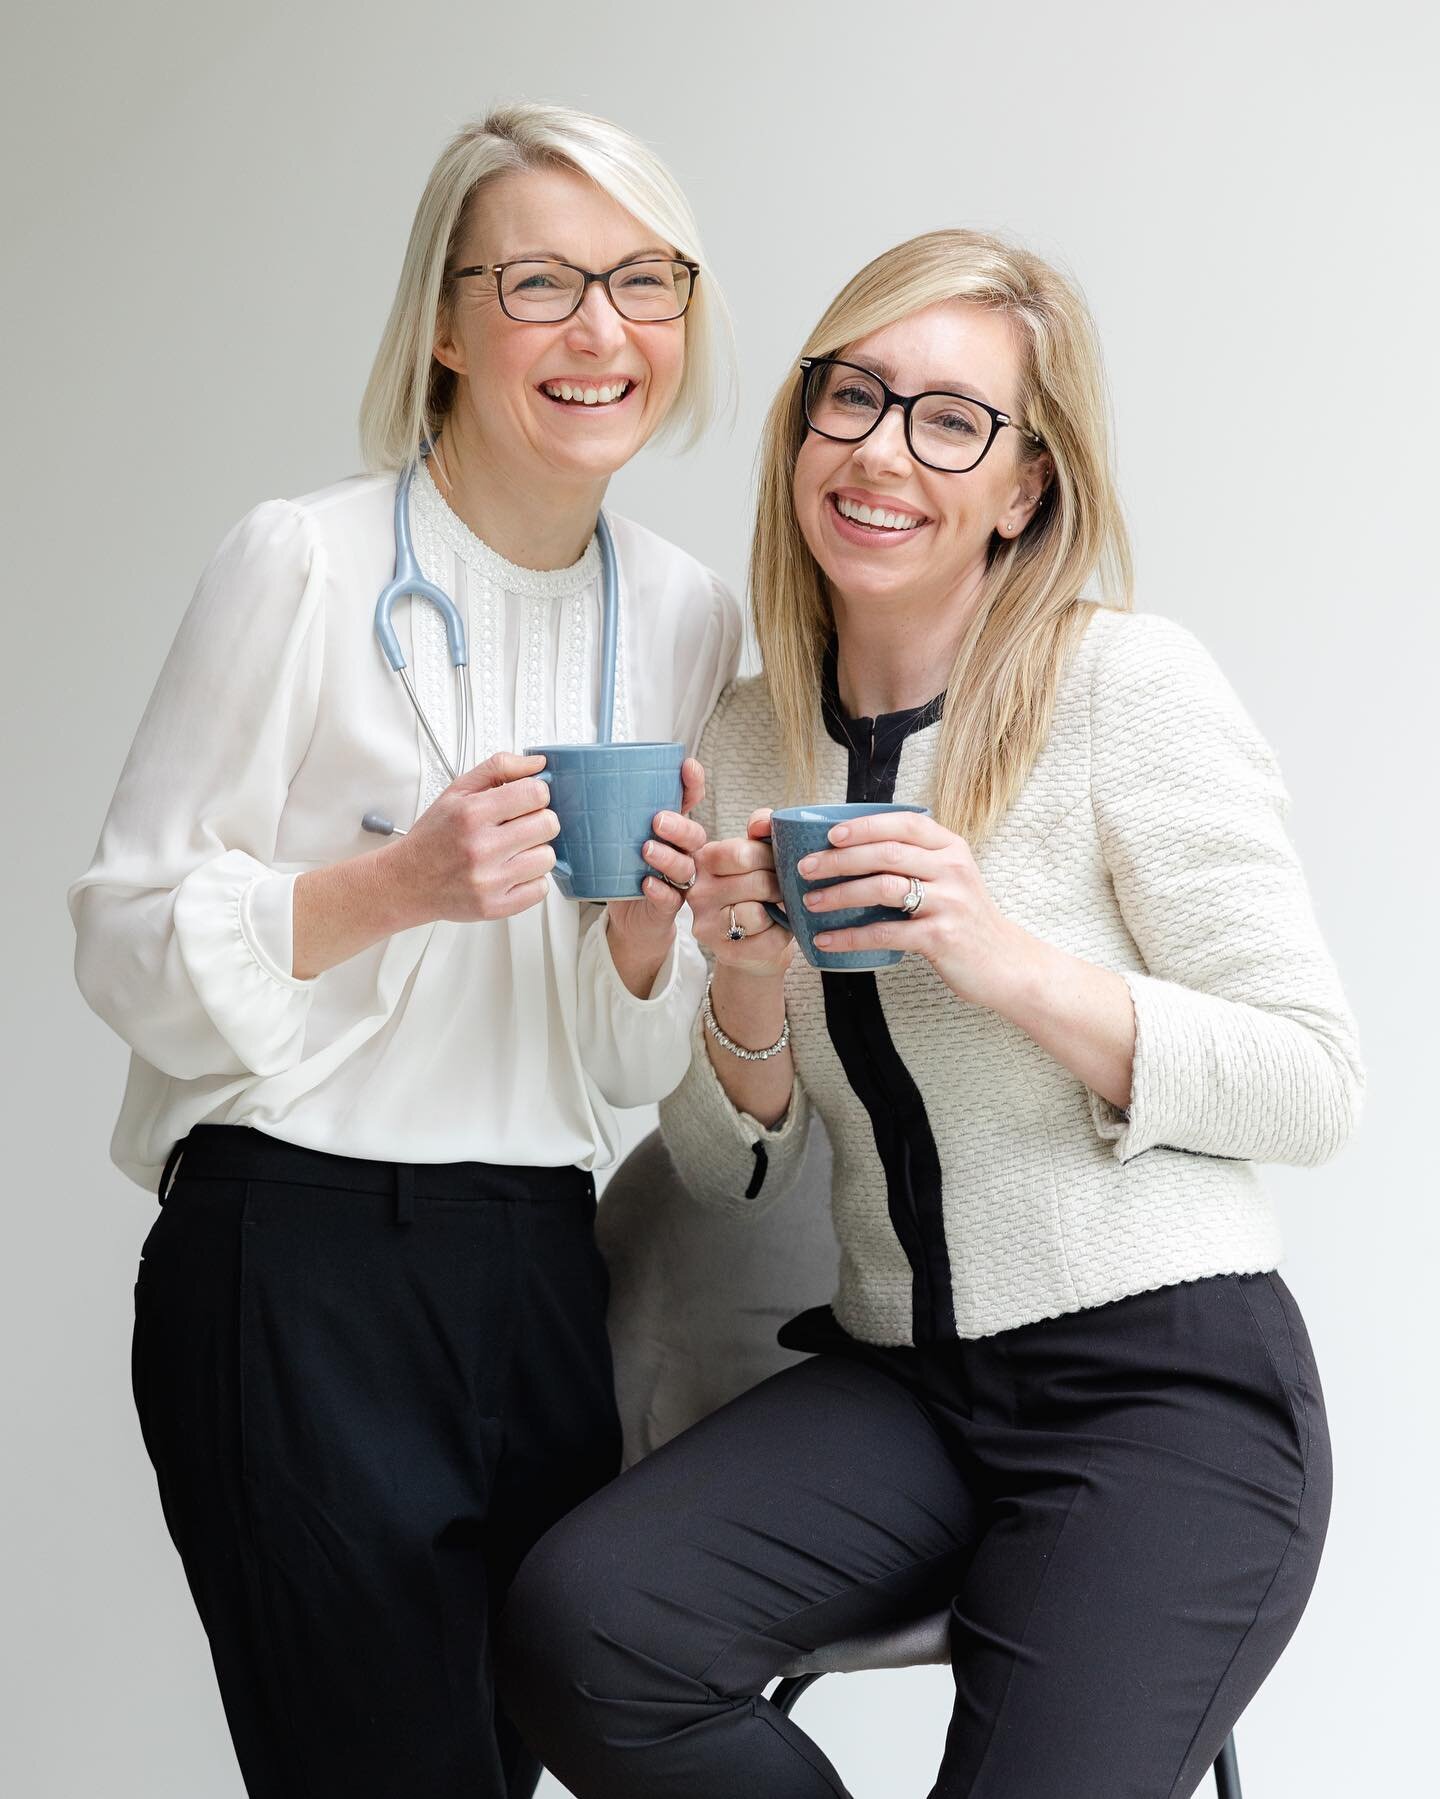 The lovely Laura and Kate from @thelifestylehealthclinic on their hour long session. The aim of this brand shoot was to get some clean professional images they could use to update their website and some content for socials. 

I love that the stethosc